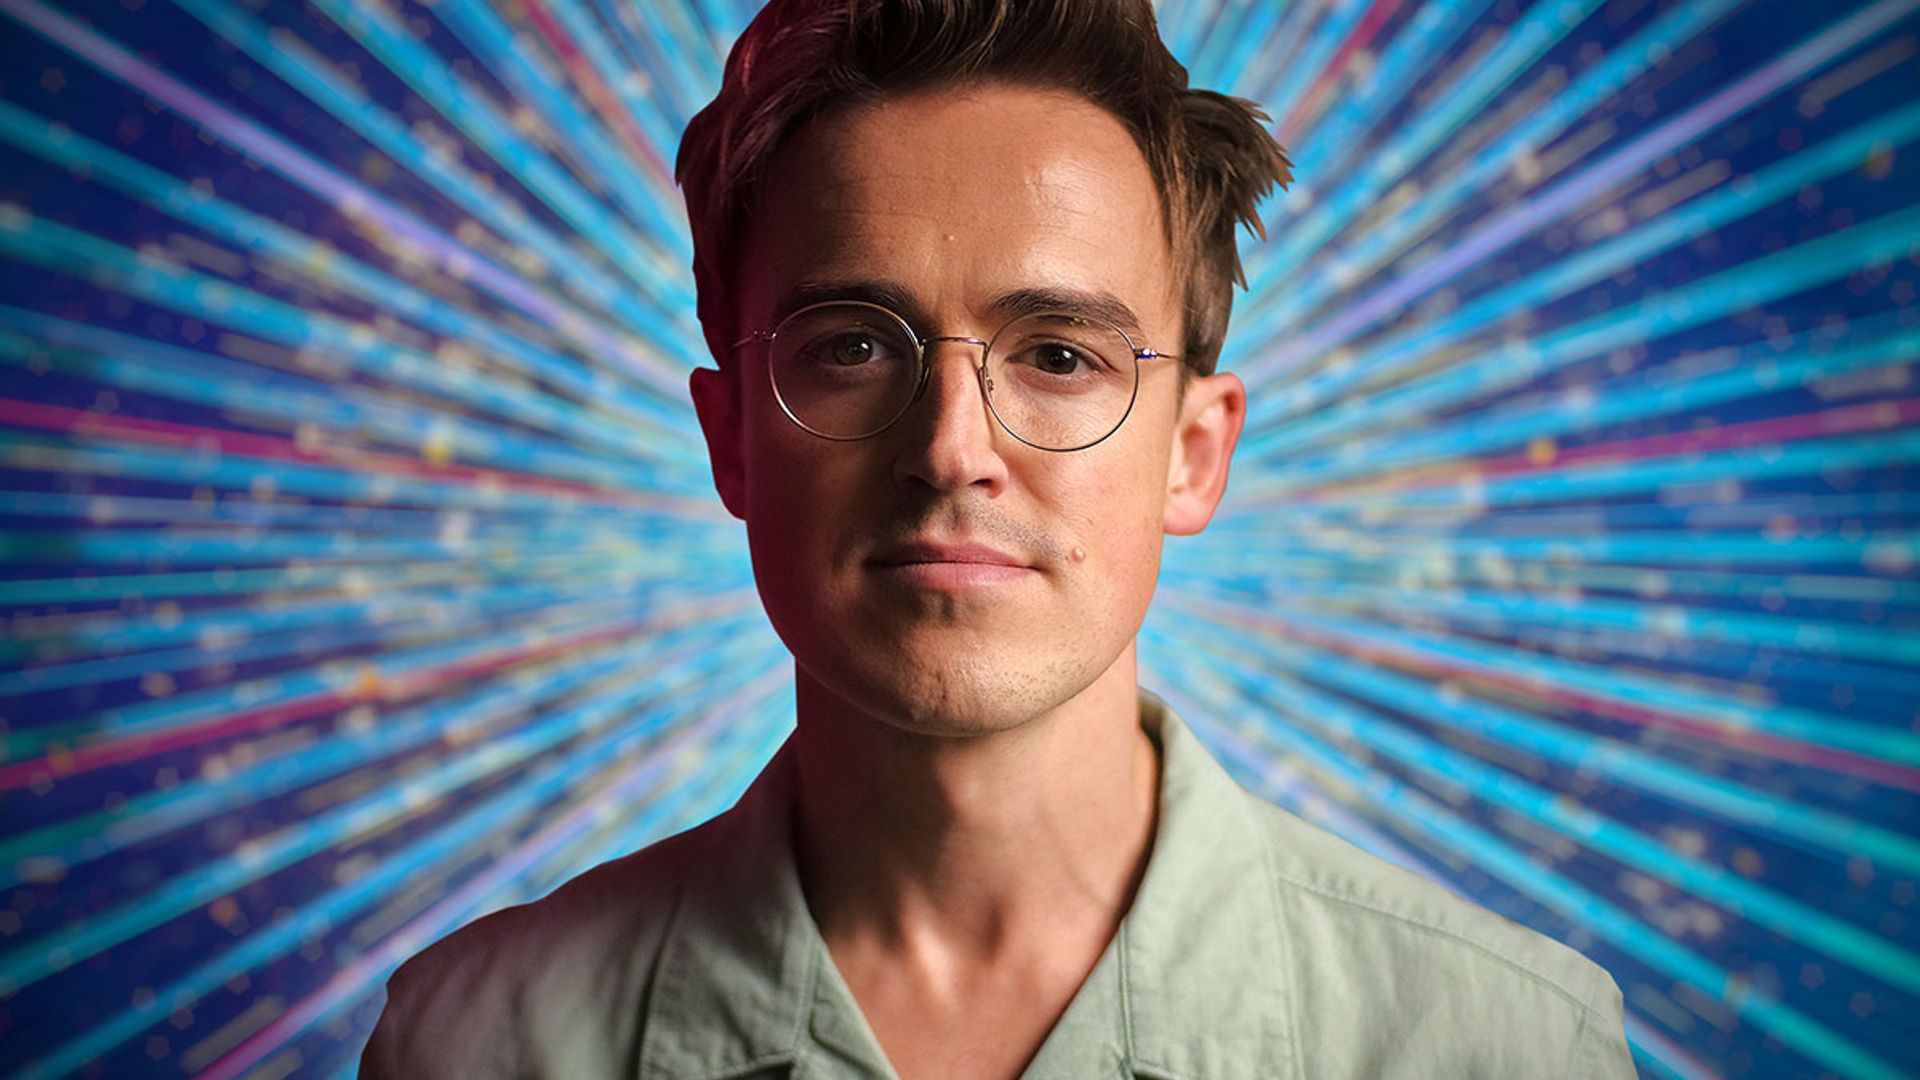 Strictly Come Dancing's Tom Fletcher delights fans with glimpse into first day of filming